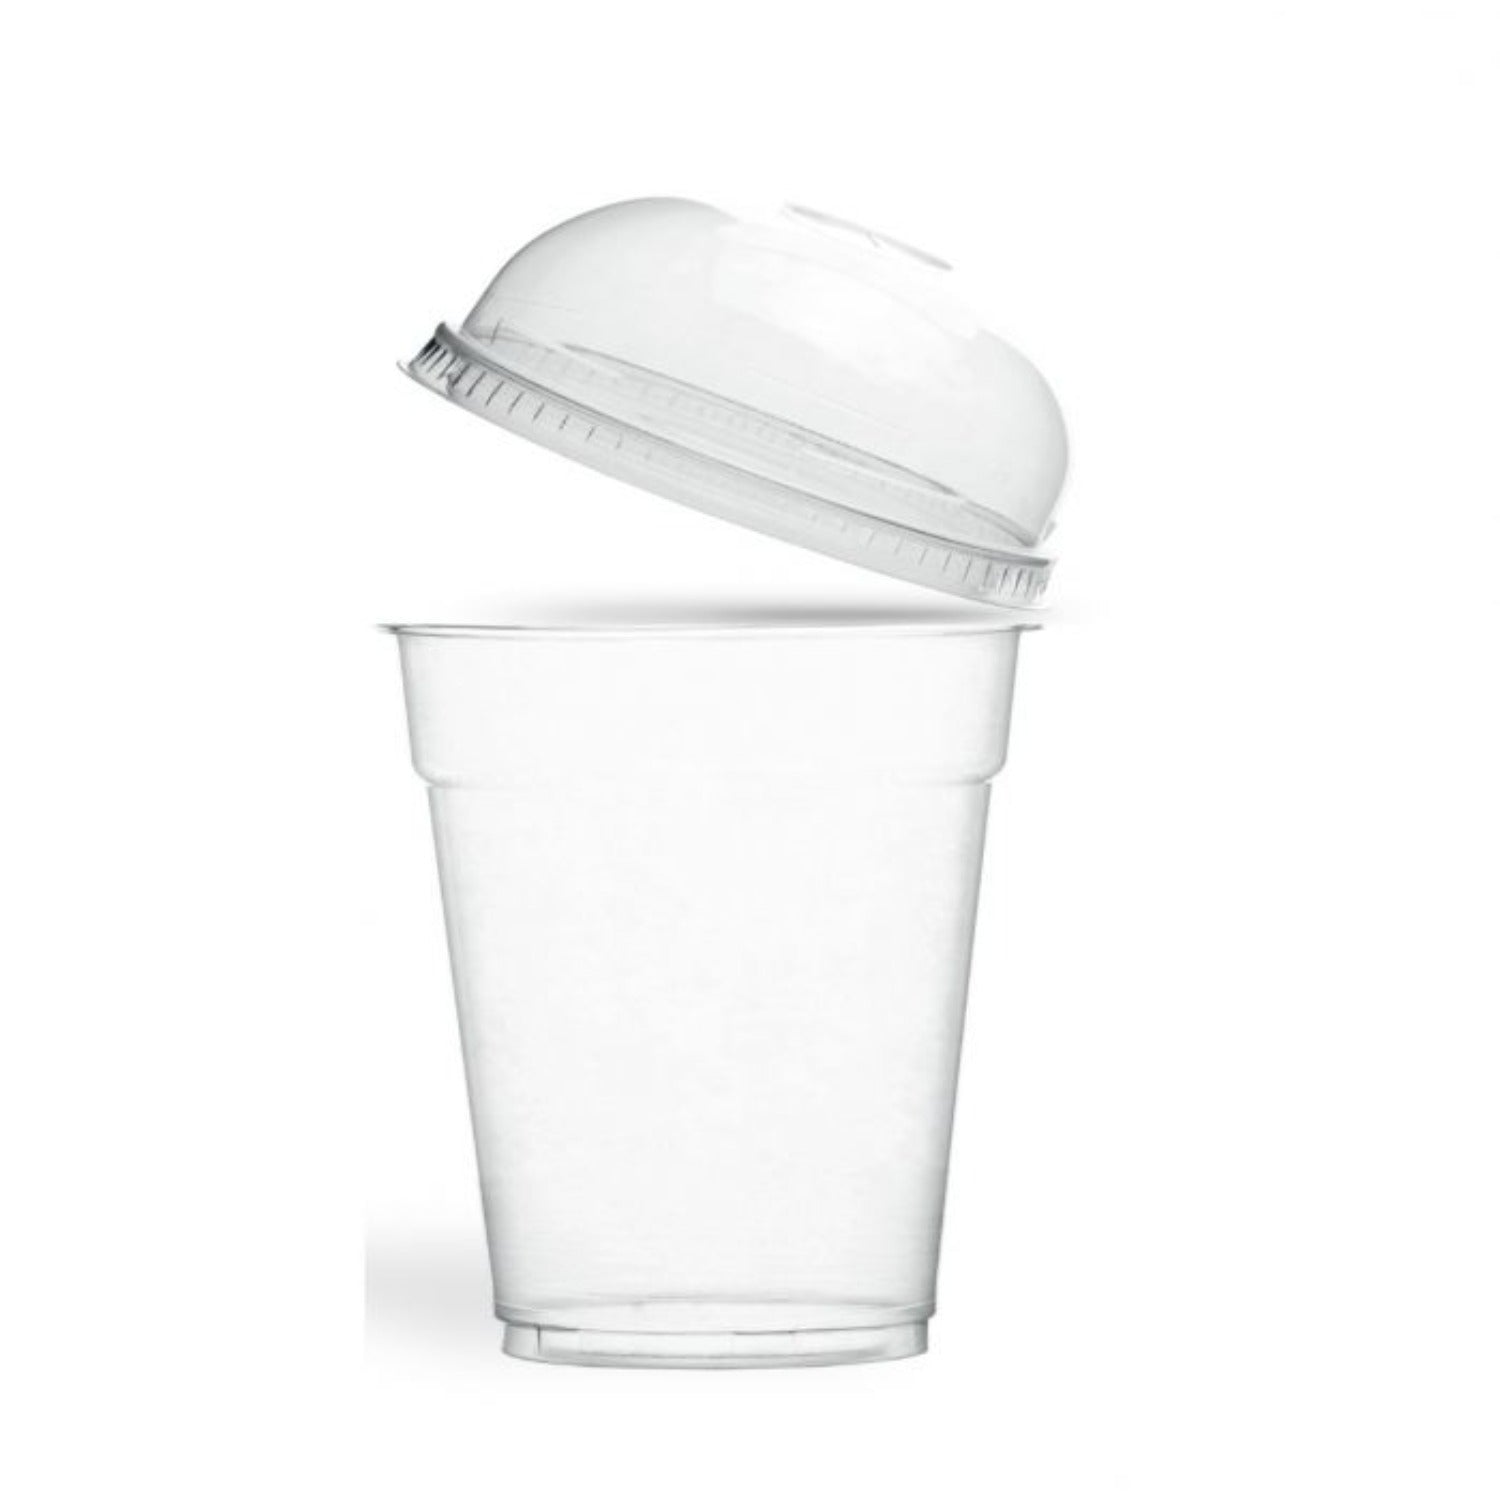 COMBIPACK - 12oz Smoothie Cup and Domed Lid - 1000pk